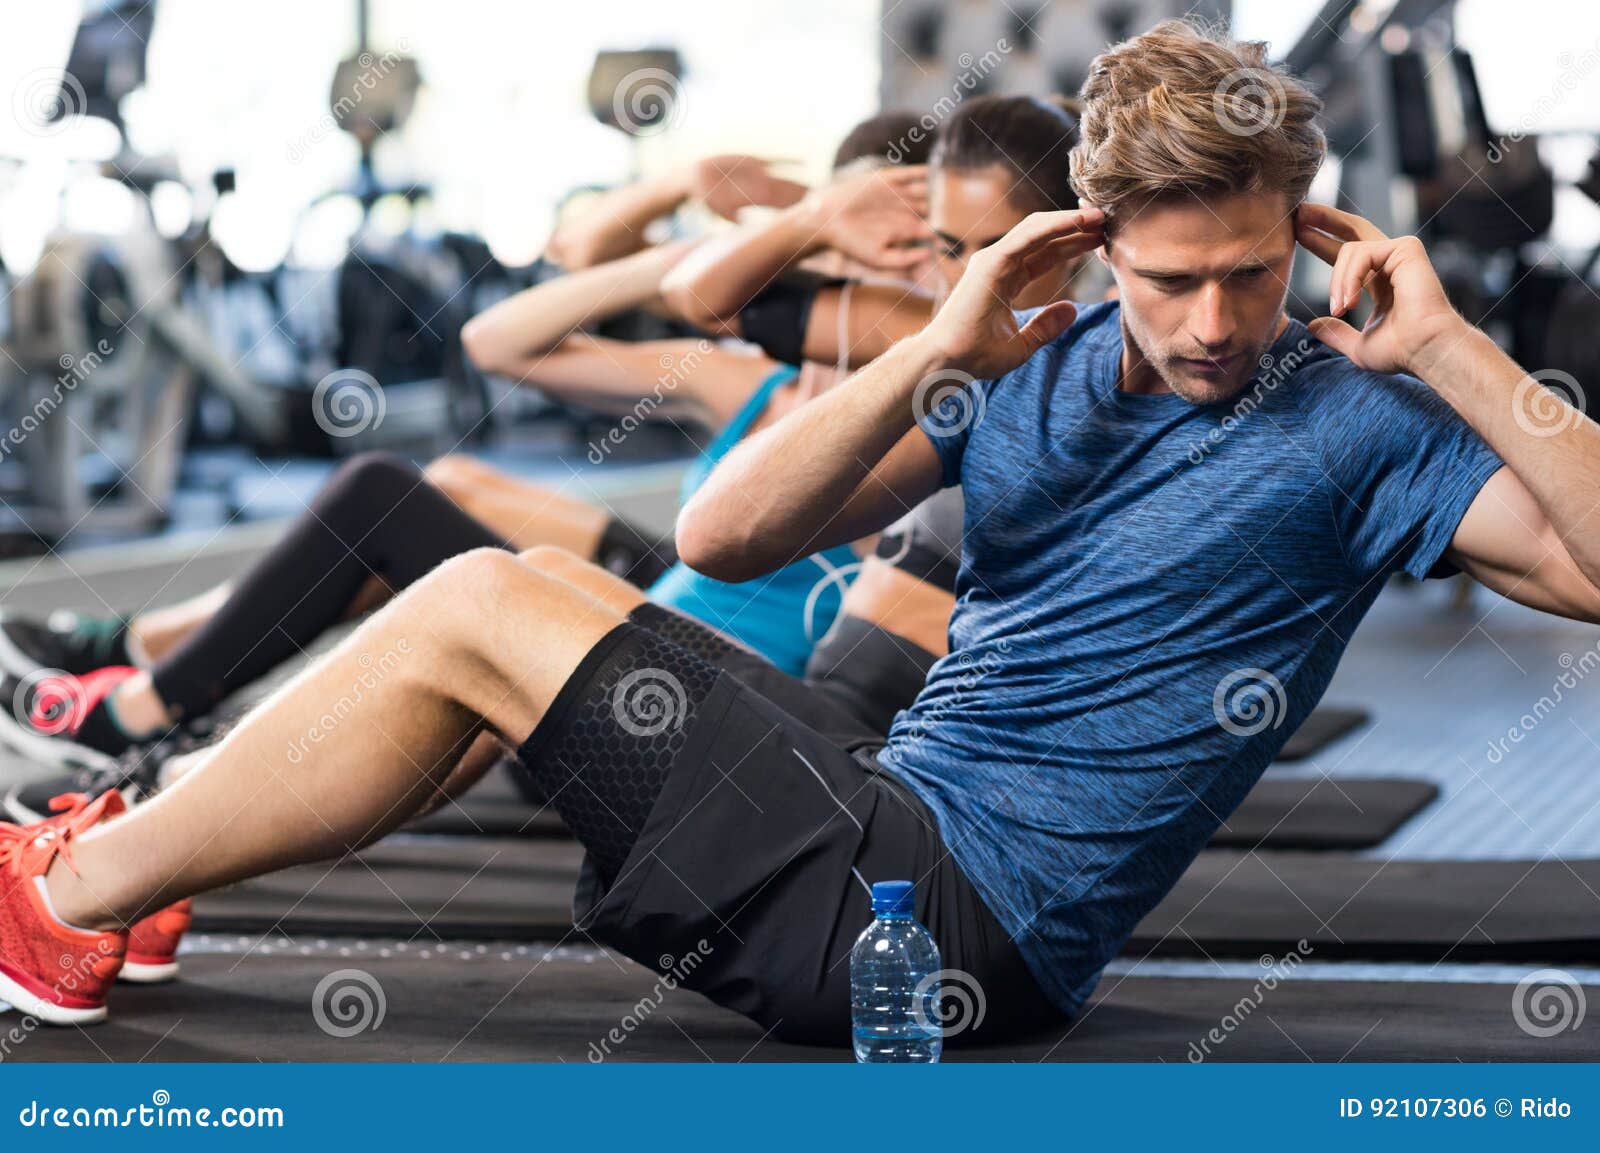 https://thumbs.dreamstime.com/z/man-doing-sit-ups-muscular-guy-gym-other-people-background-young-athlete-stomach-workout-modern-gym-handsome-fit-92107306.jpg